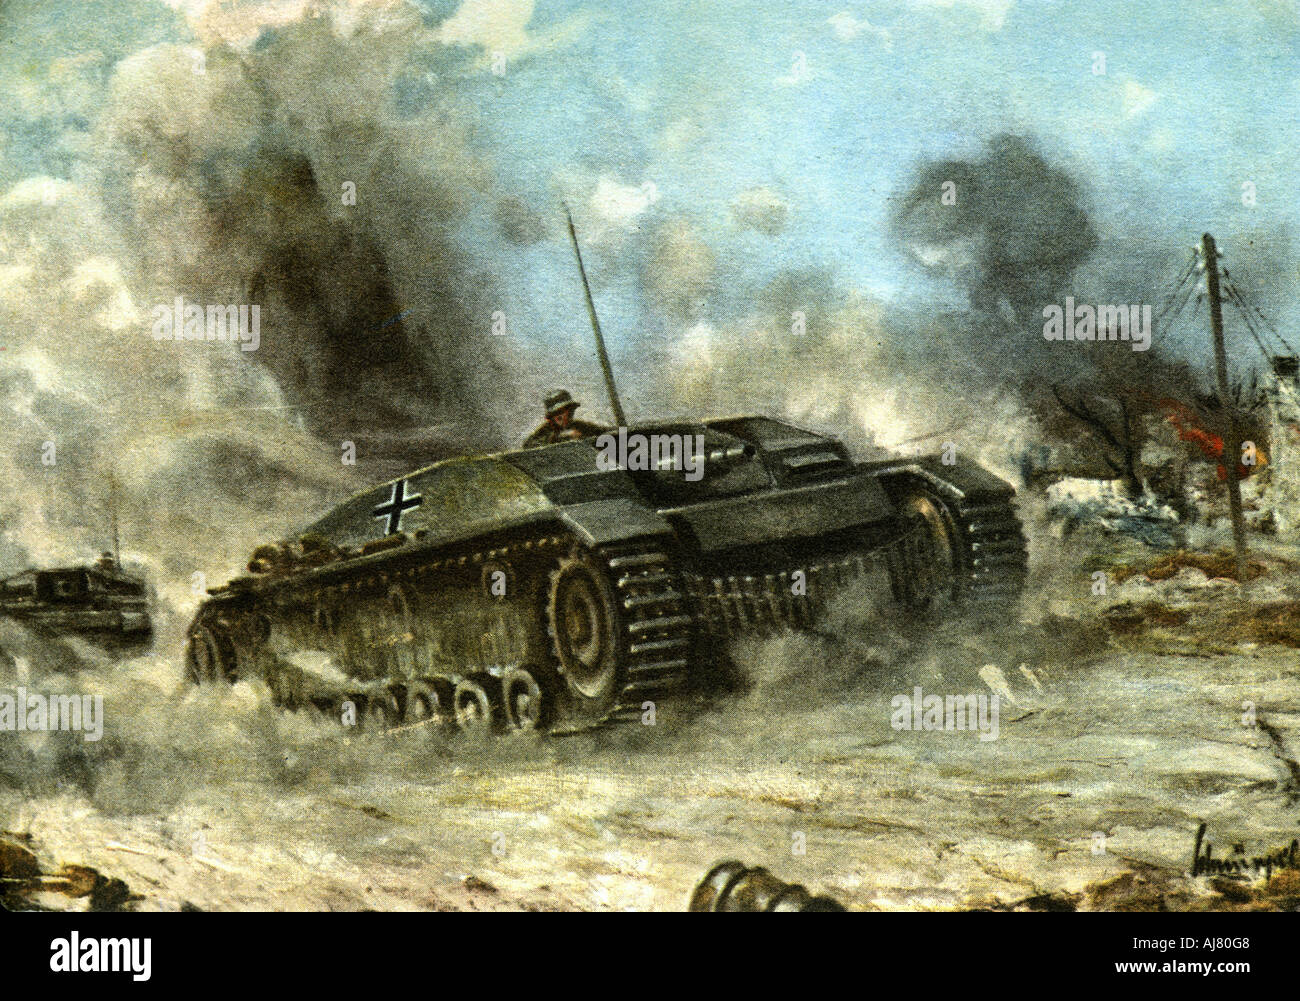 German tank in action on the Russian front, World War II, 1942-1943. Artist: Anon Stock Photo